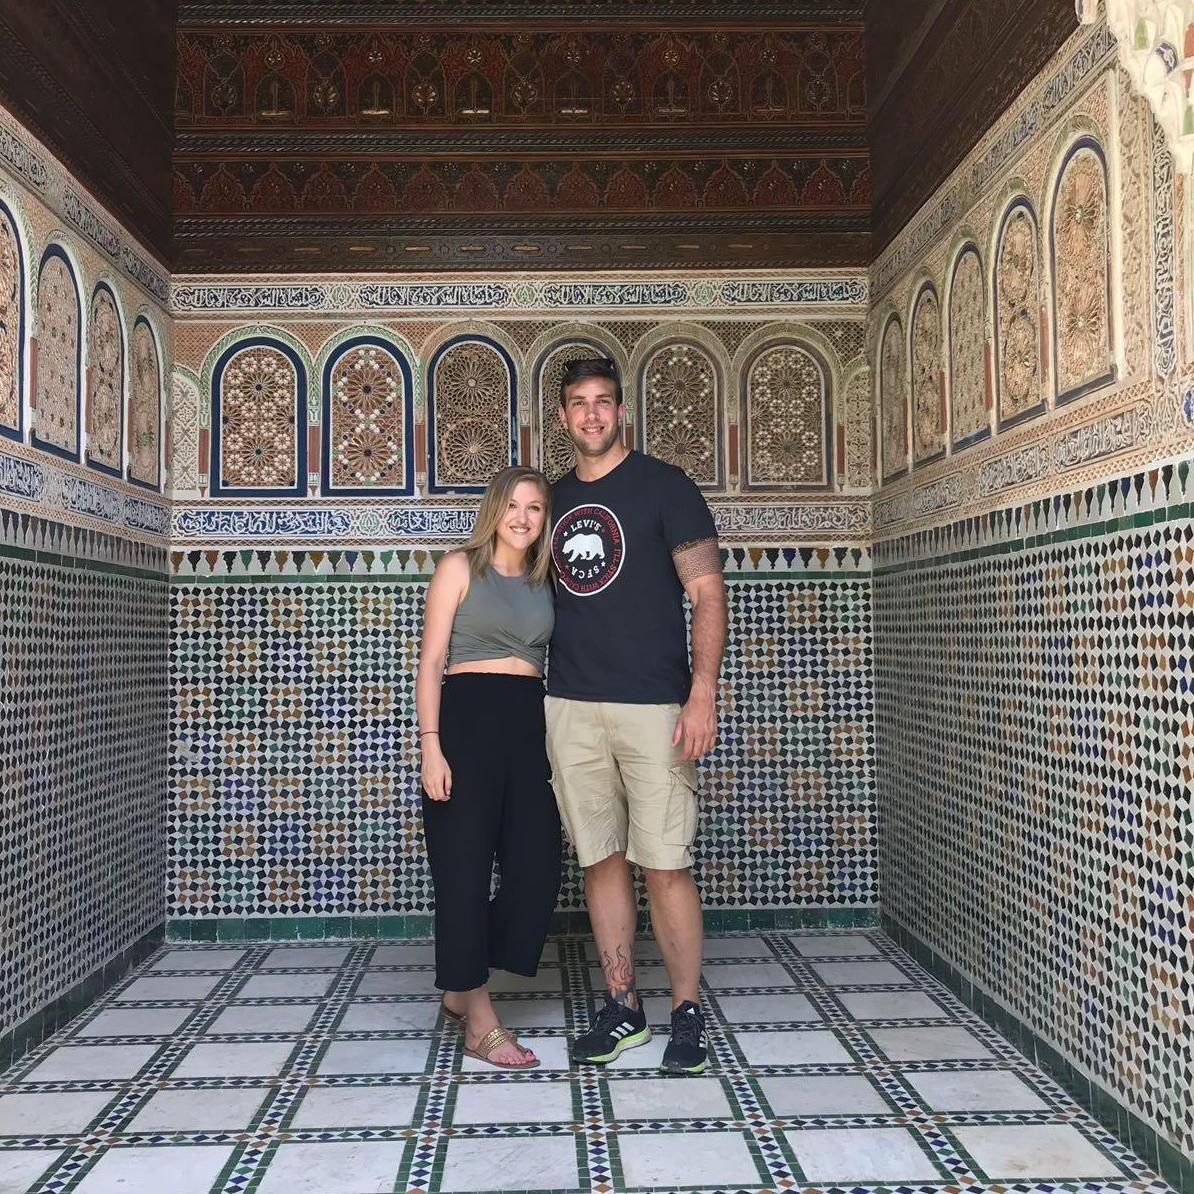 Exploring a beautiful plaza in Marrakech. Not pictured: the sketchy salesmen that swindled us into a "tour" and chased us out when we didn't buy camelskin poufs. #touristfail